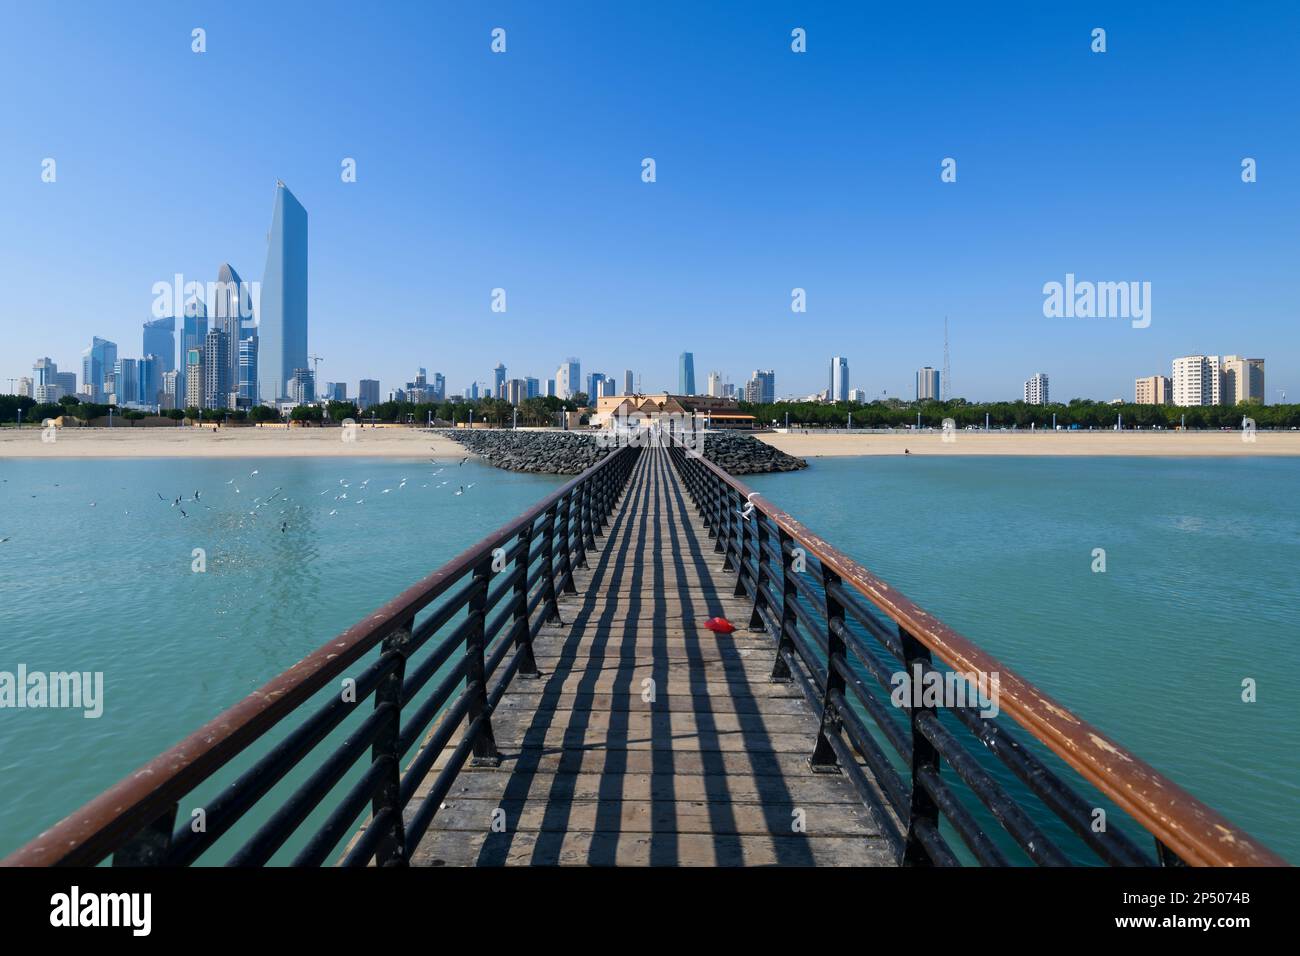 Kuwait City skyiline seen from the Kuwait Tower fishing ramp, a public pier for fishing. Dasman beach and skycrapers. Stock Photo